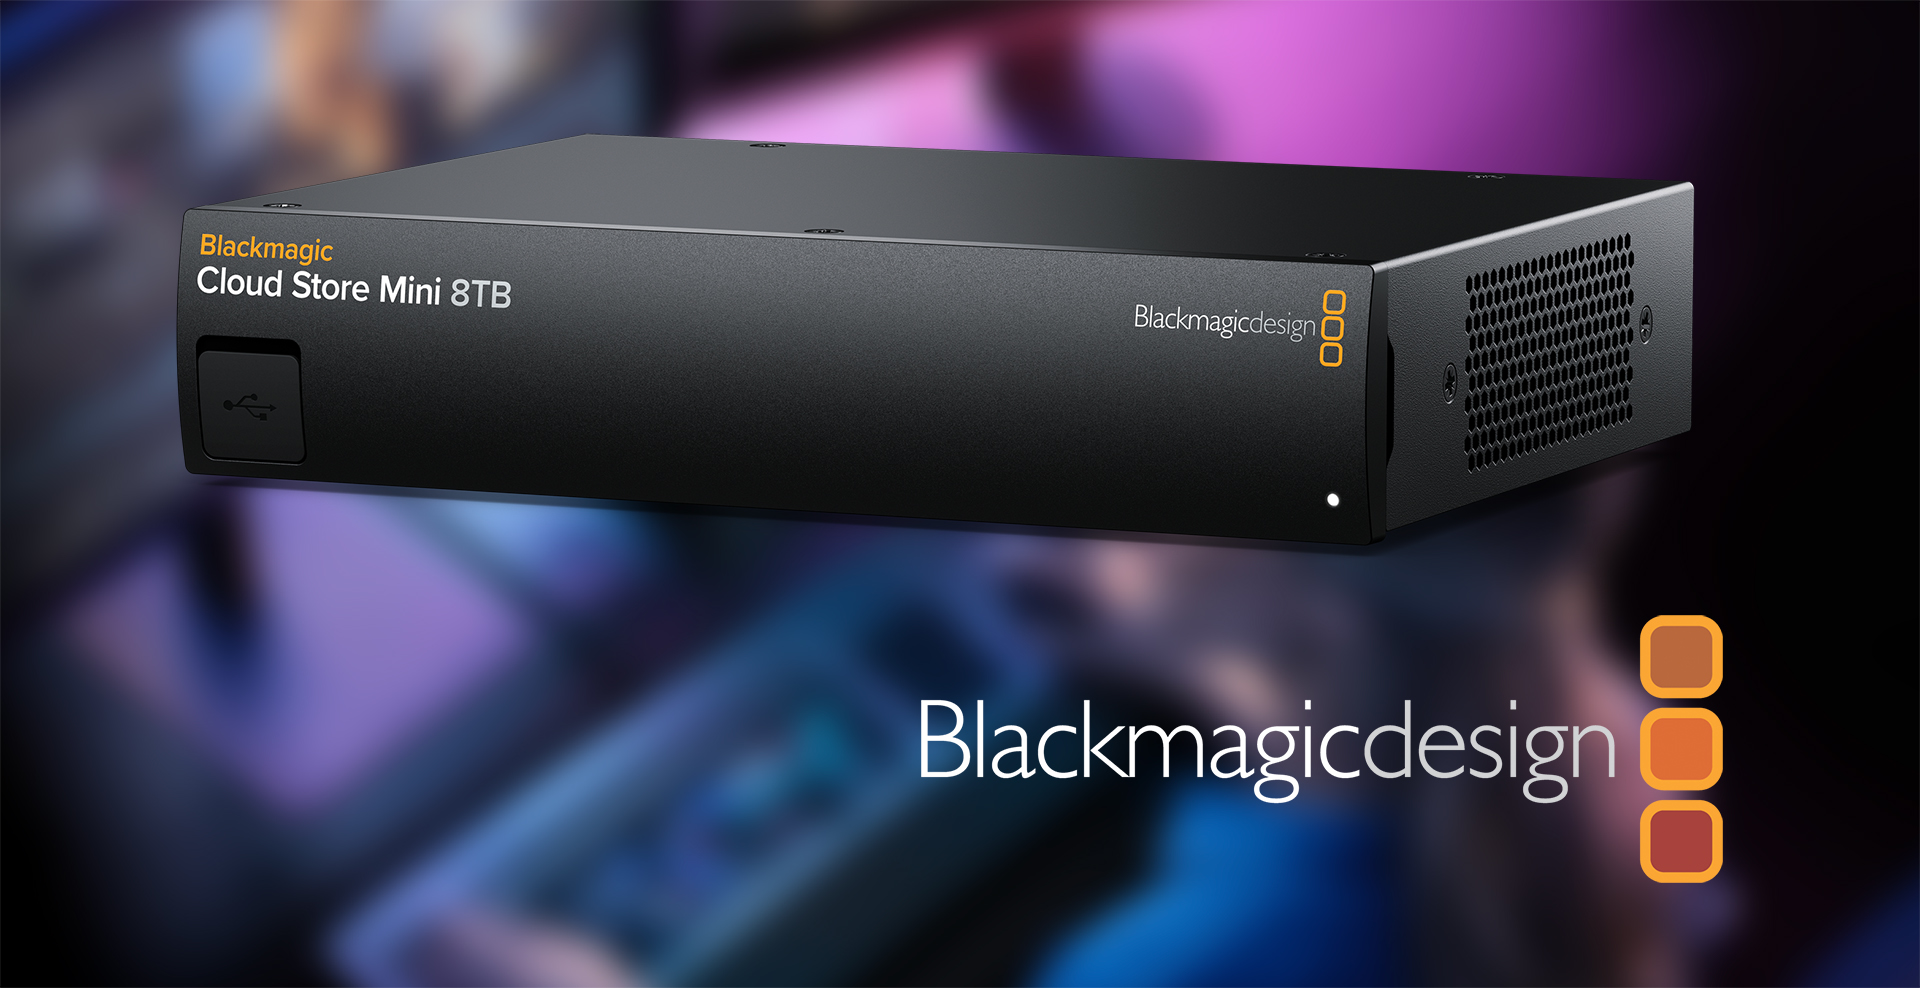 Review: A look at the Blackmagic Cloud Store Mini 9